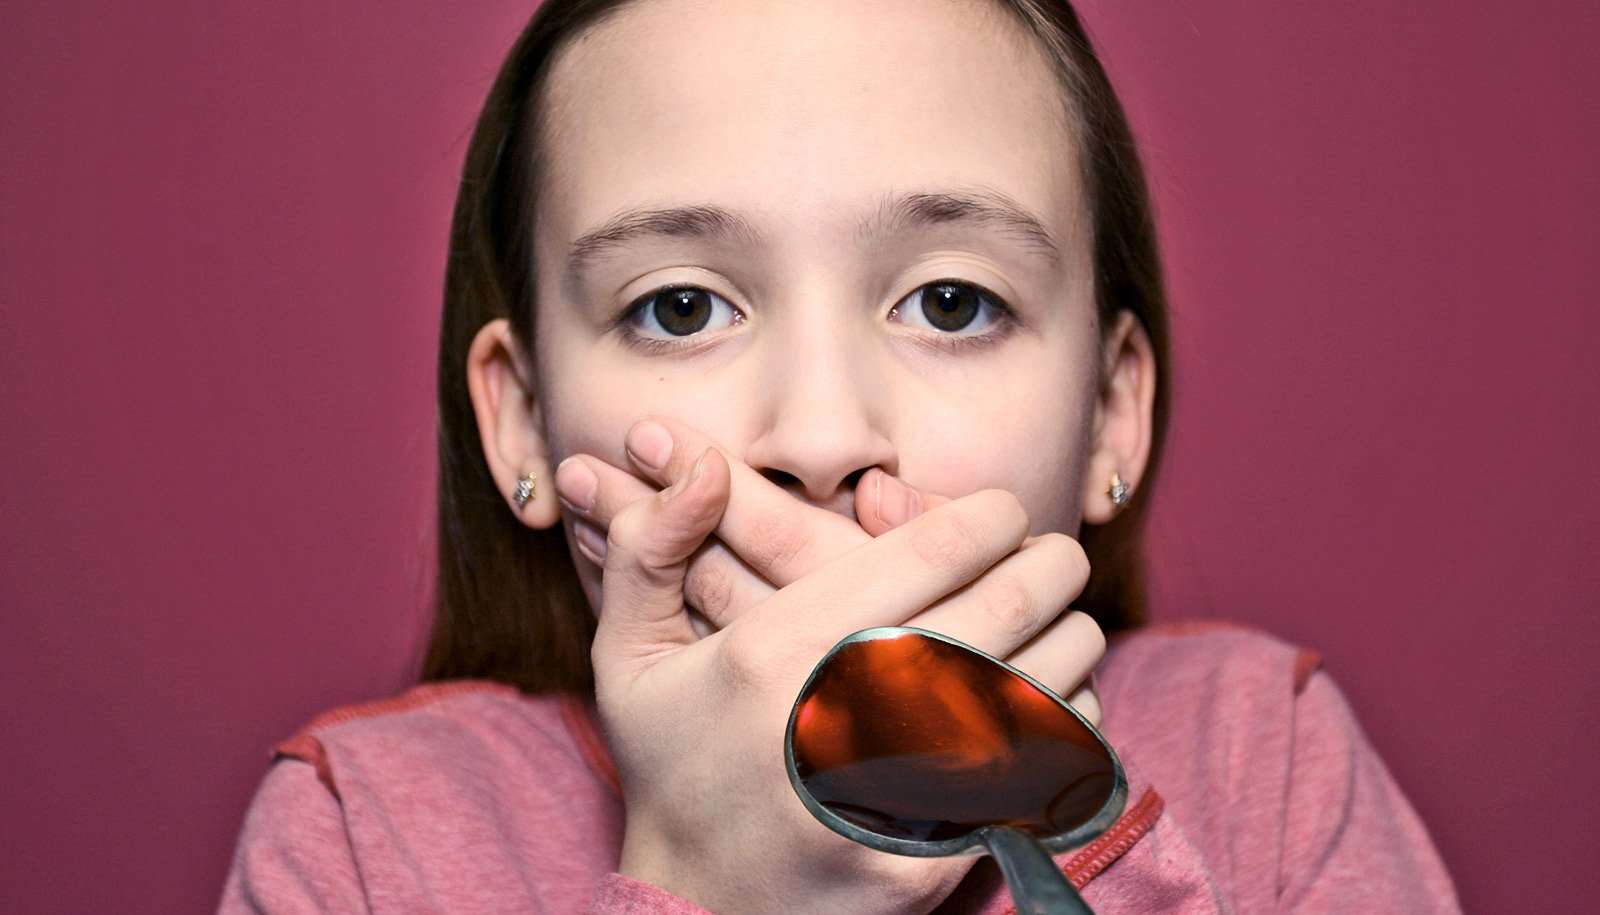 5 things parents should know about coughing kids